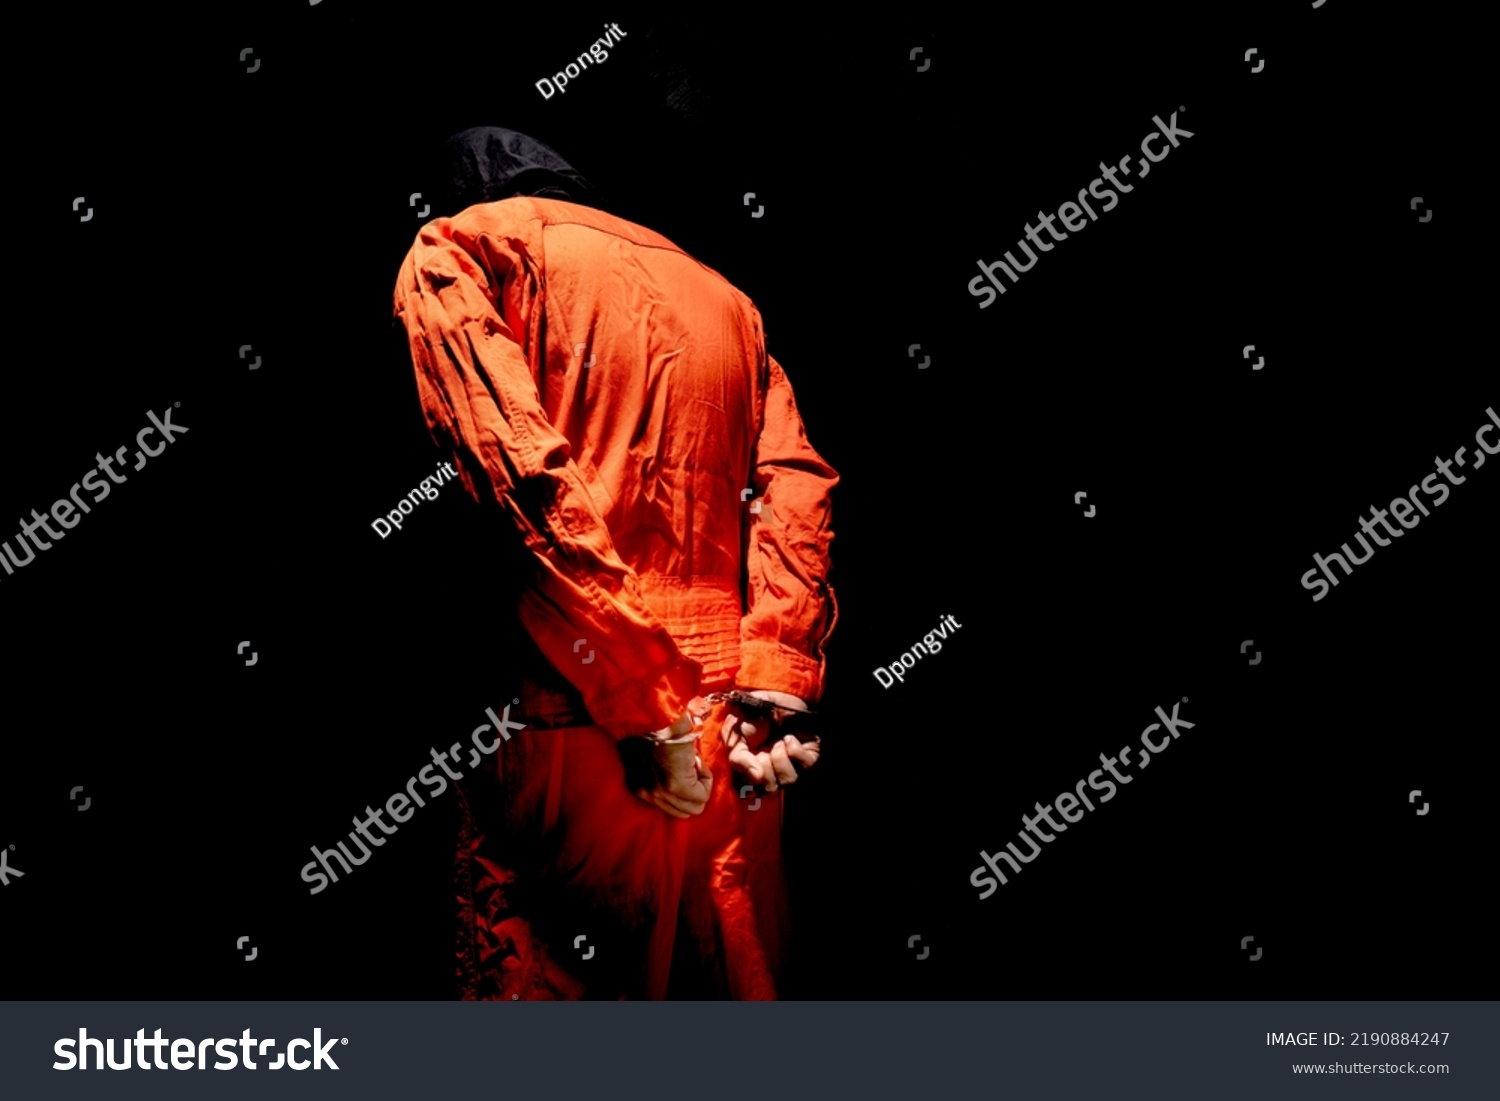 Handcuffs on Accused Criminal in Orange Jail Jumpsuit. Law Offender Sentenced to Serve Jail Time, in black background
 #2190884247